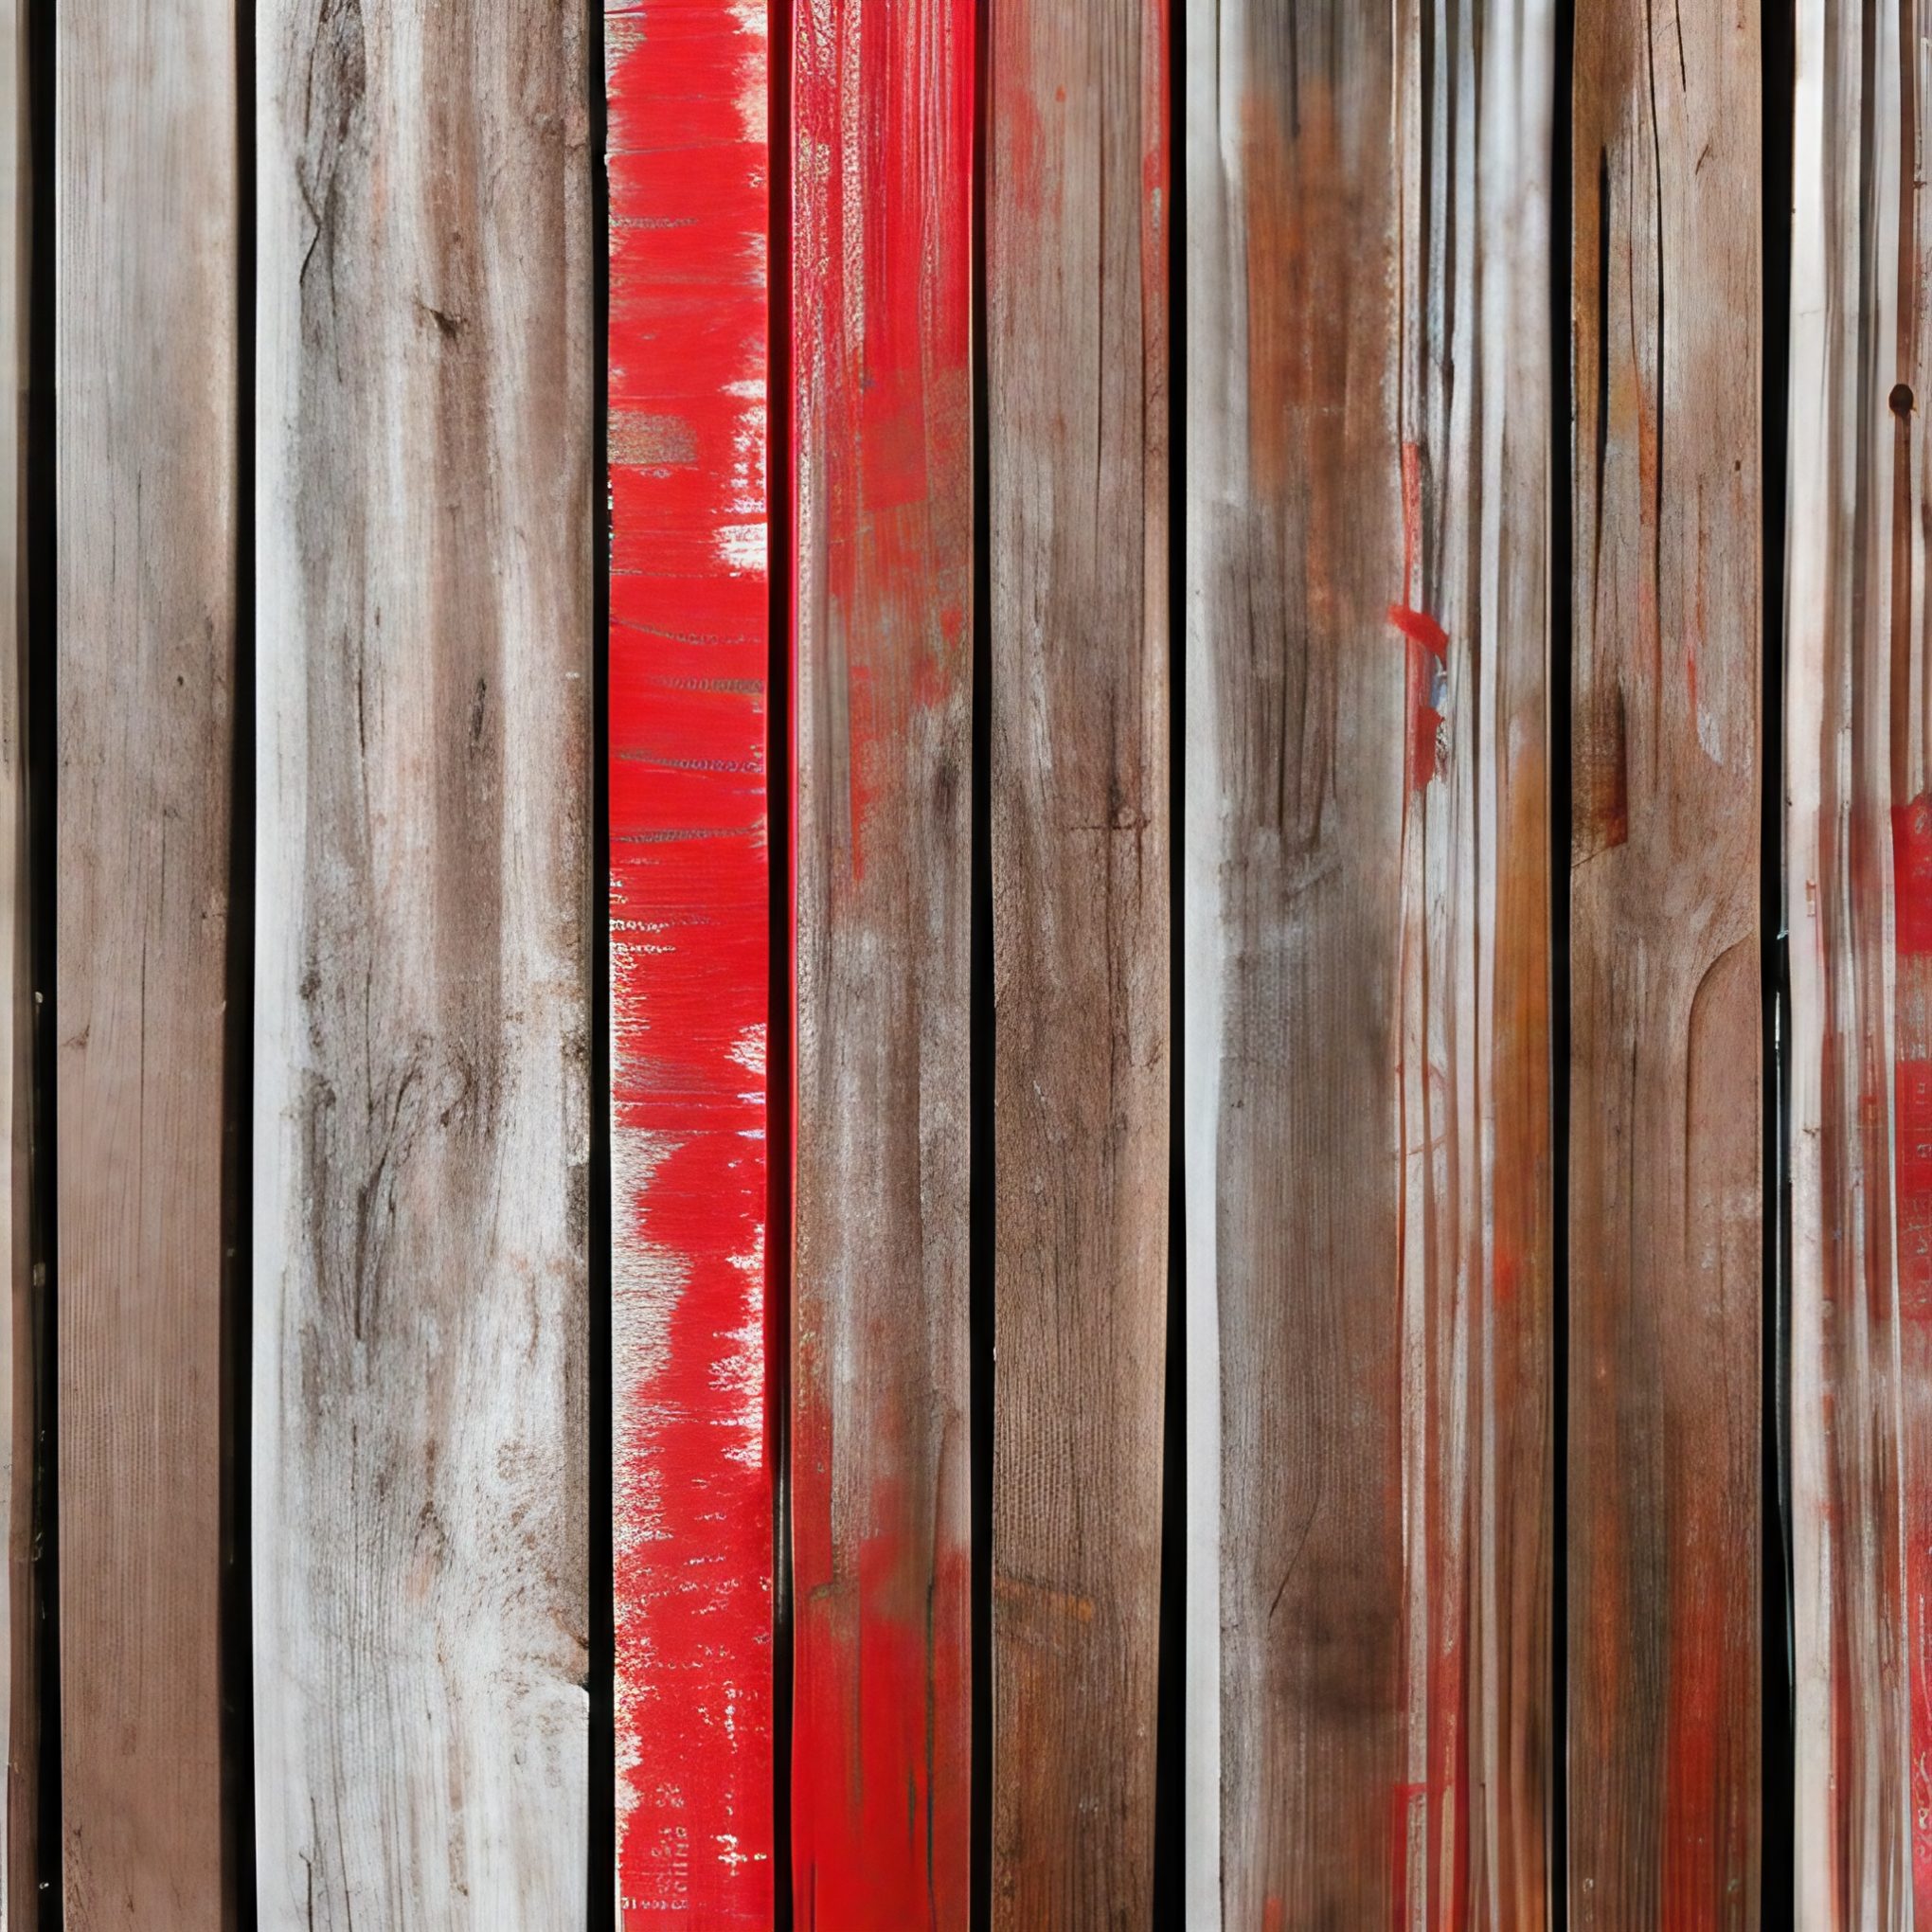 Rustic Wooden Fence Panels Painted Red Worn and Weathered